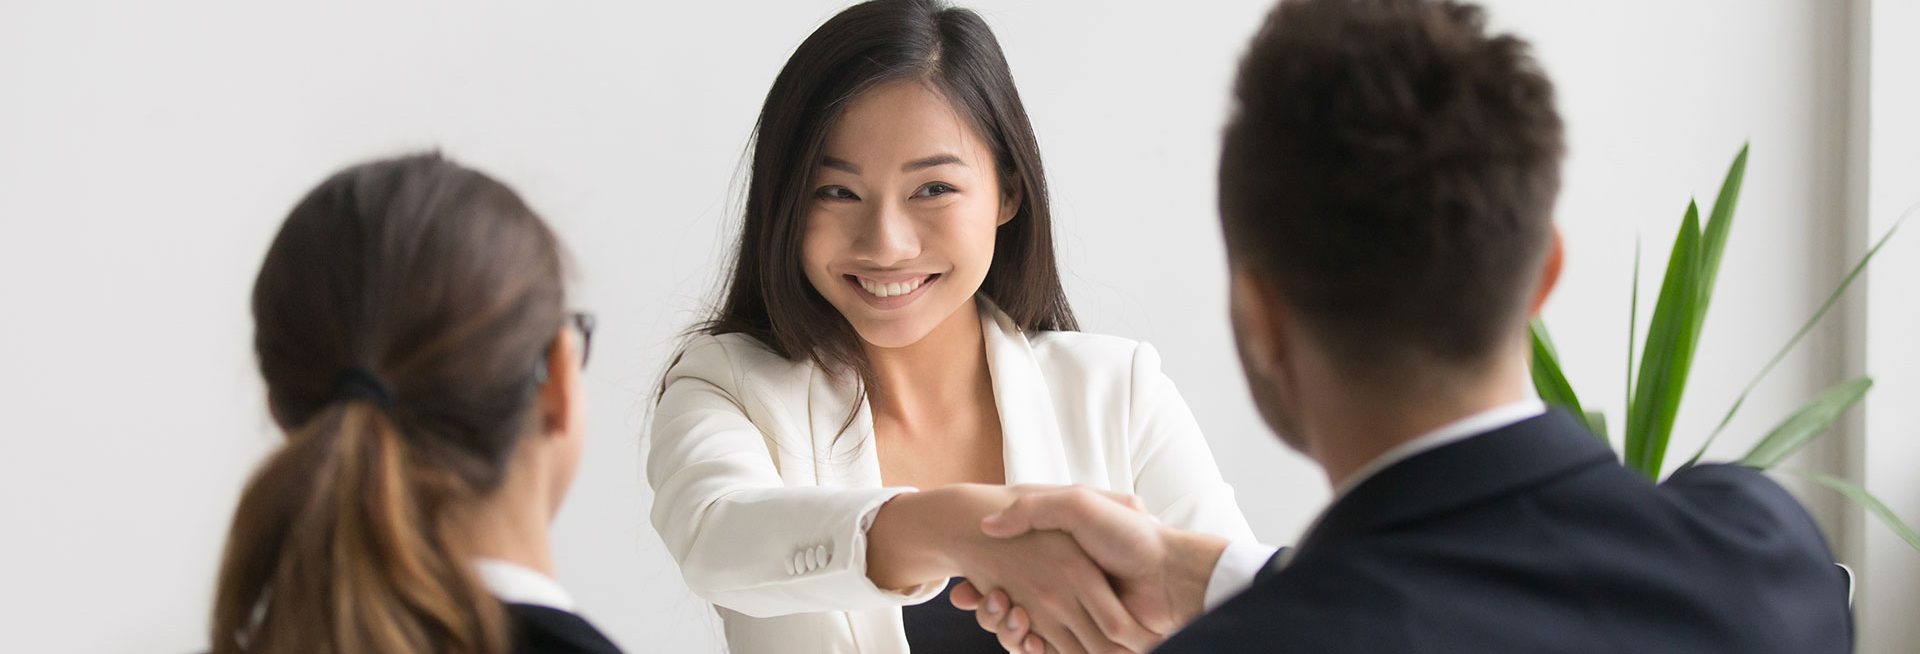 A young woman shaking hands after a meeting